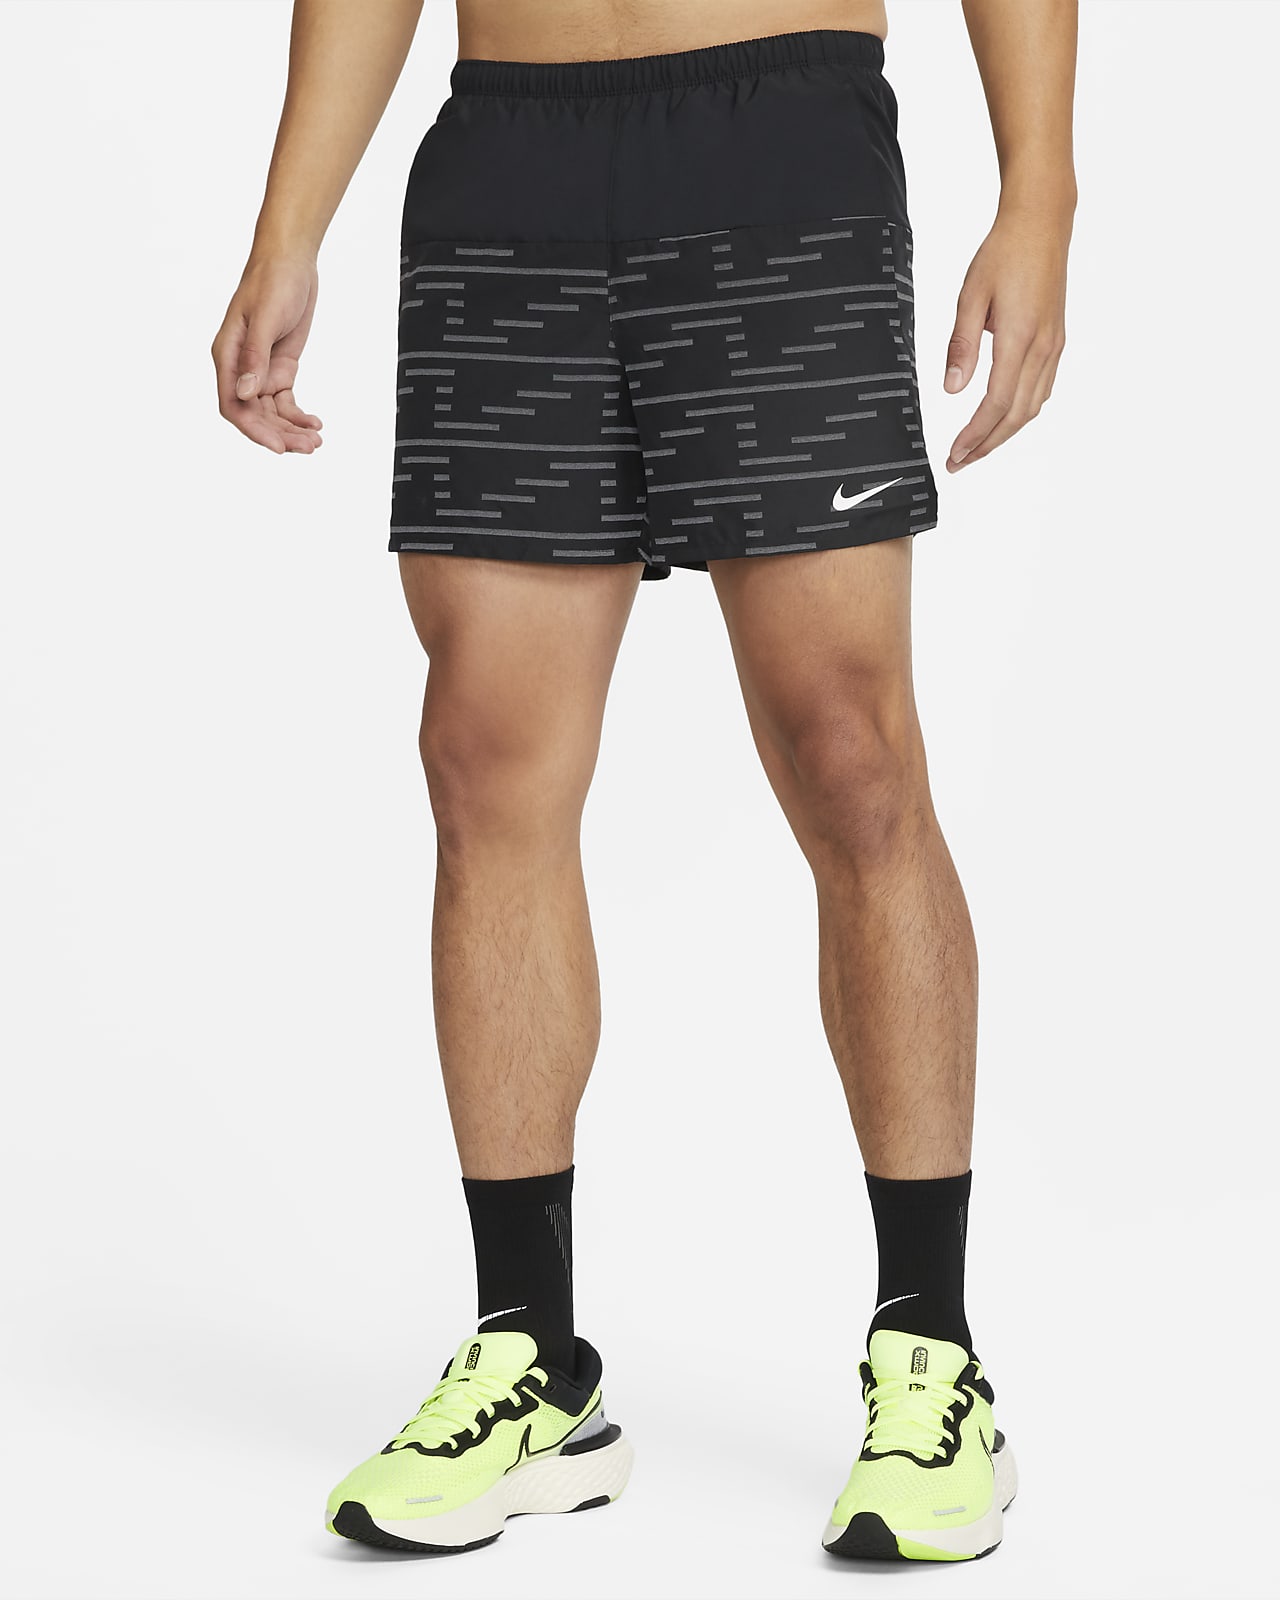 Nike Dri-FIT Challenger Run Division Men's 13cm (approx.) Brief-Lined Running Shorts